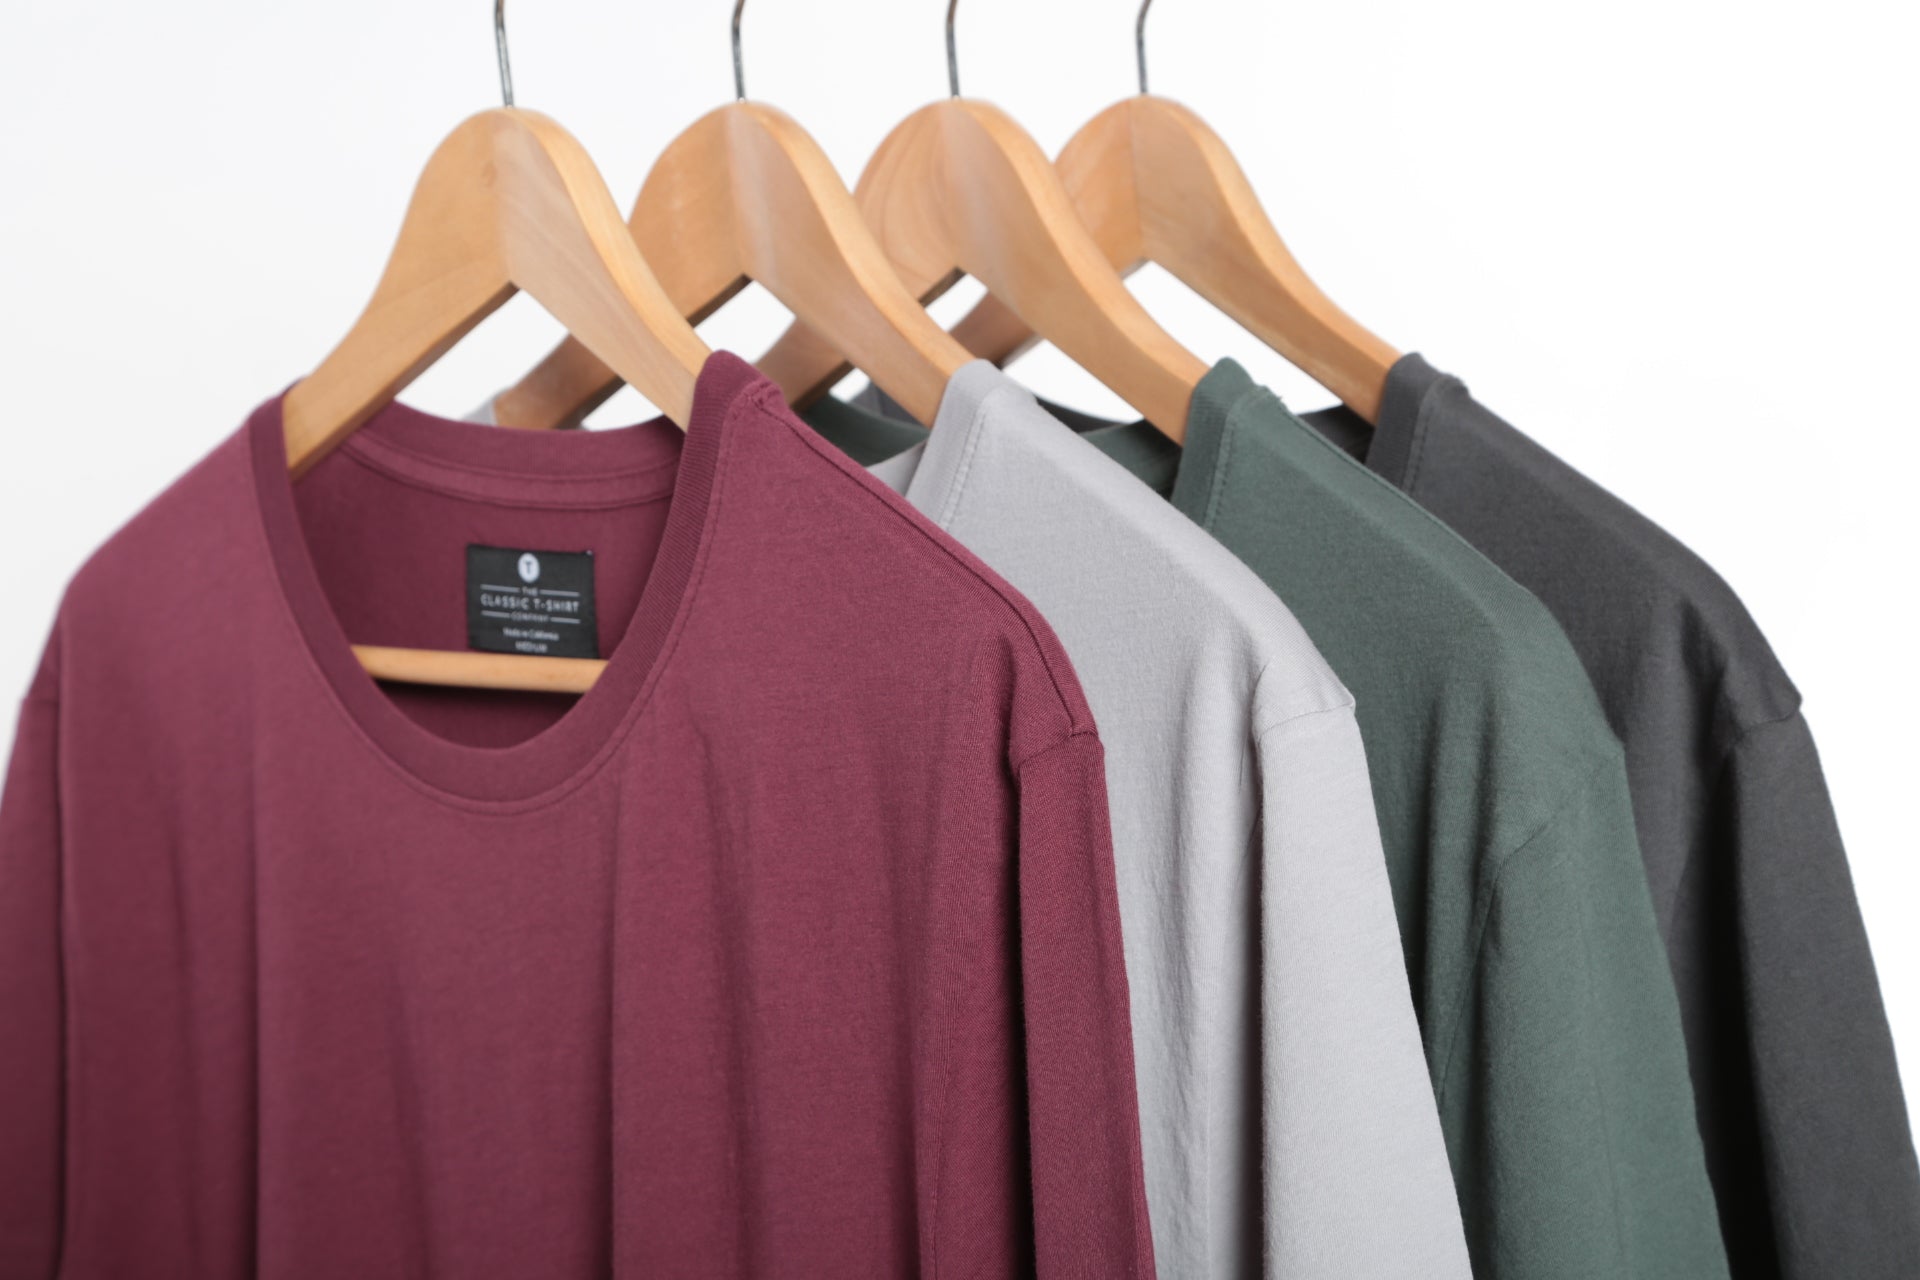 How to Take Care of Your Organic Cotton T-shirts - The Classic T-Shirt Company